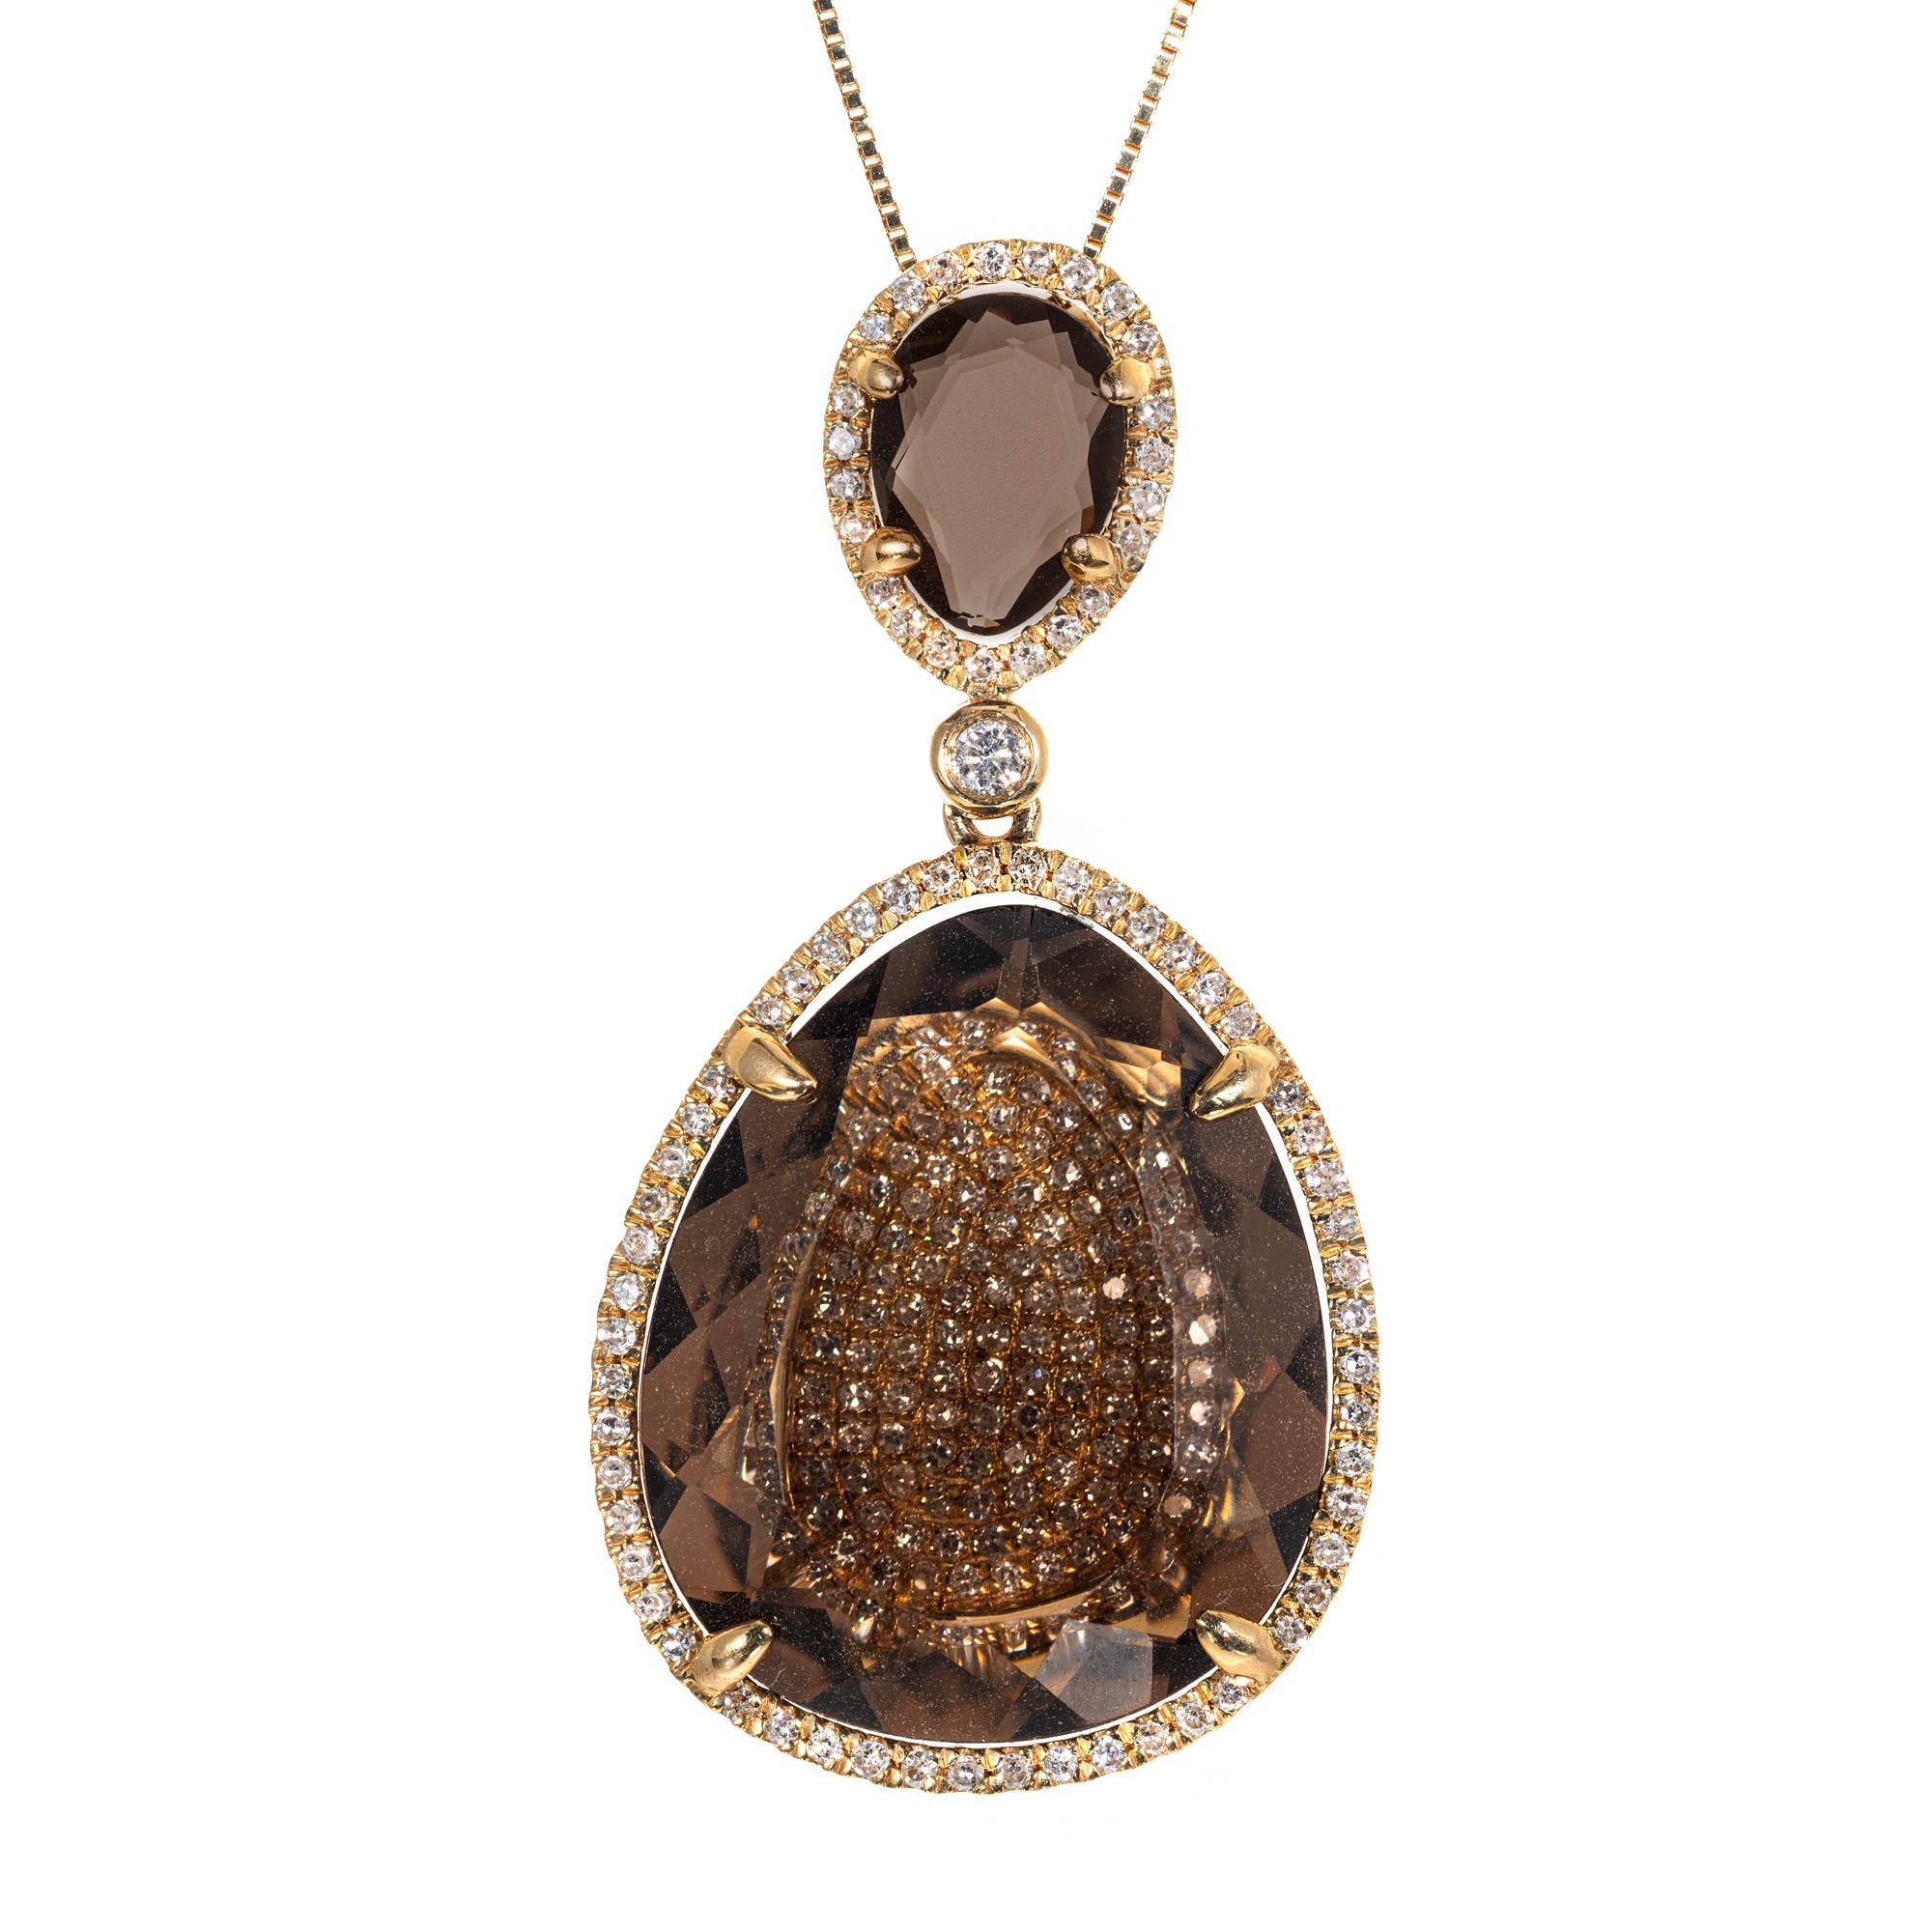 Smokey quartz and diamond pendant necklace. This unique pendant begins with a pear shaped quartz that has pave diamonds in the center that is topped off with a pear shaped  smoky quartz. The stones are connected  by around bezel set diamond. Both